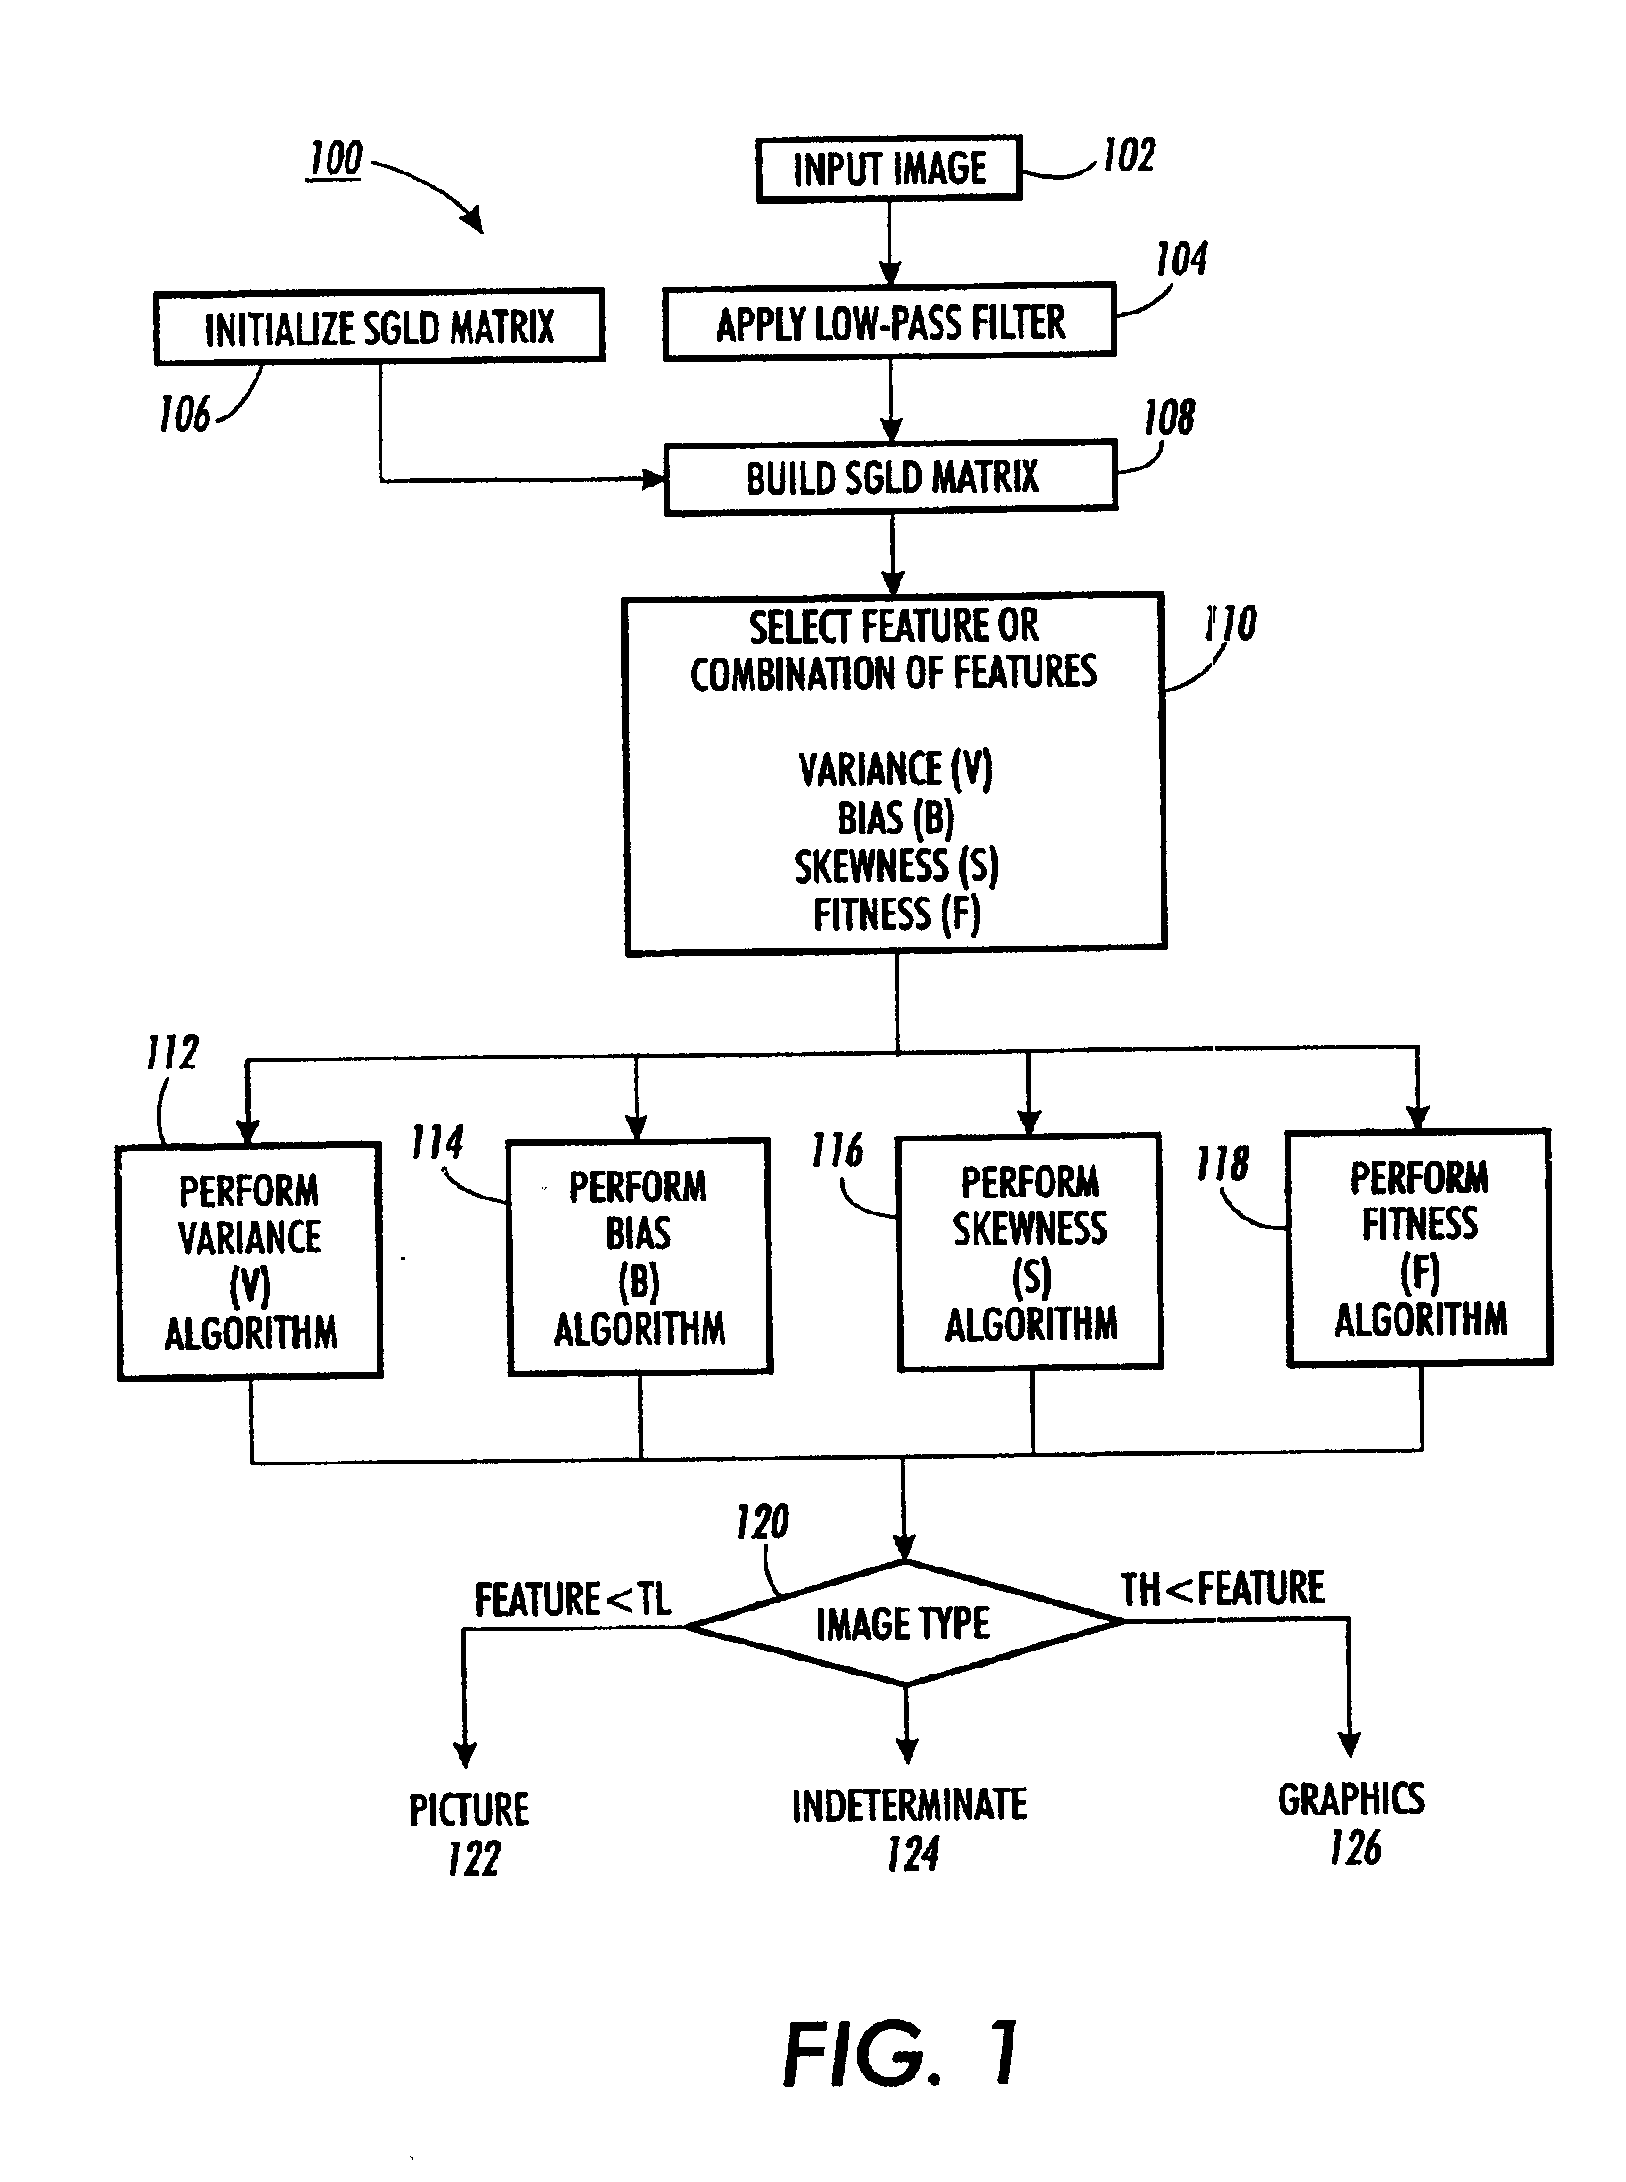 Soft picture/graphics classification system and method